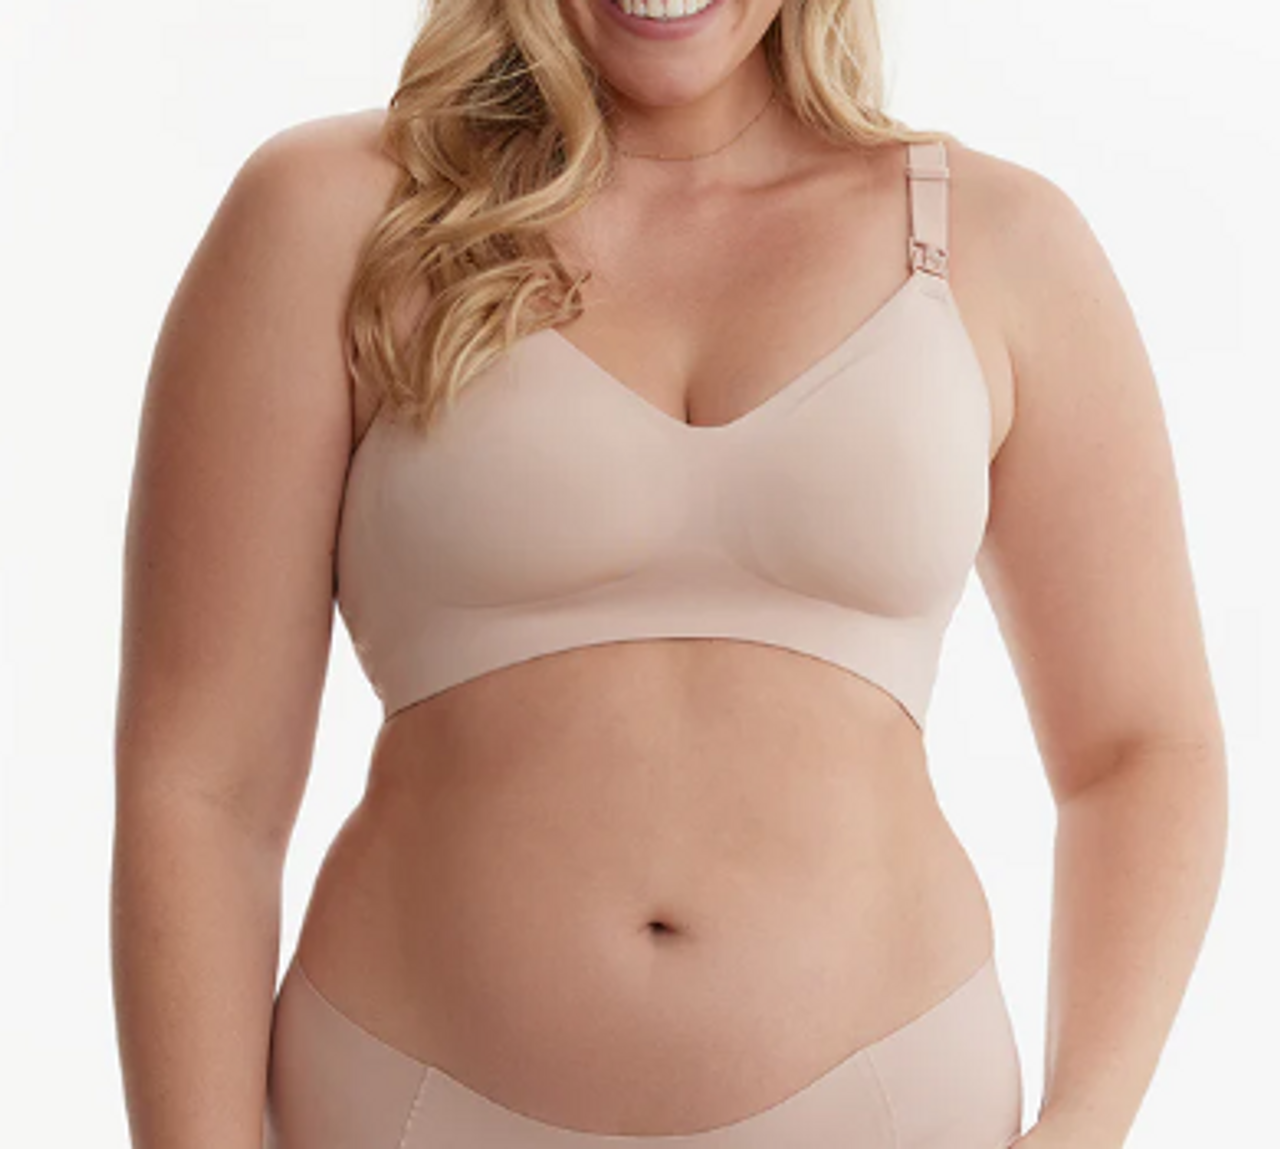 Maternity And More - Nursing Sleep Bra from Seraphine Maternity is